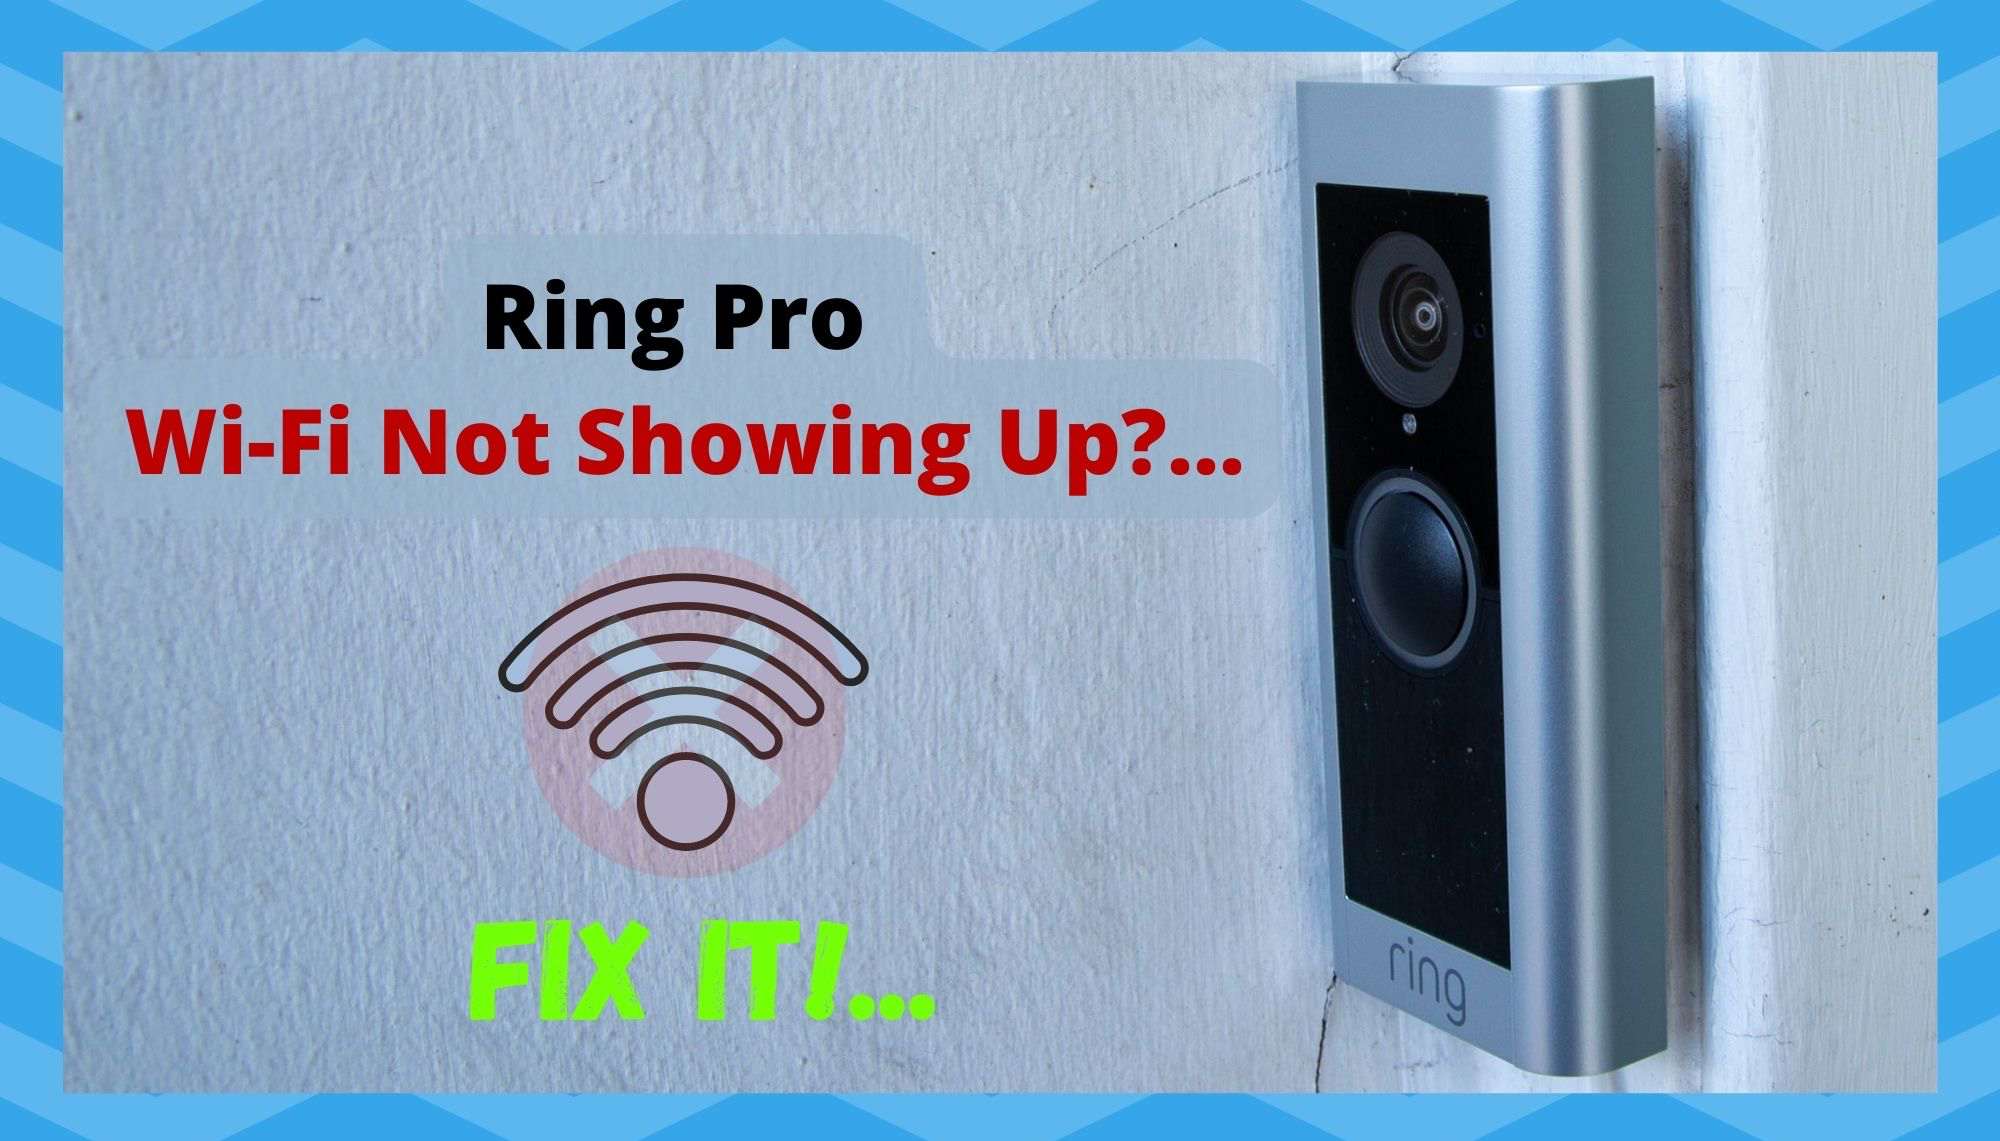 Ring Pro Wi-Fi Not Showing Up